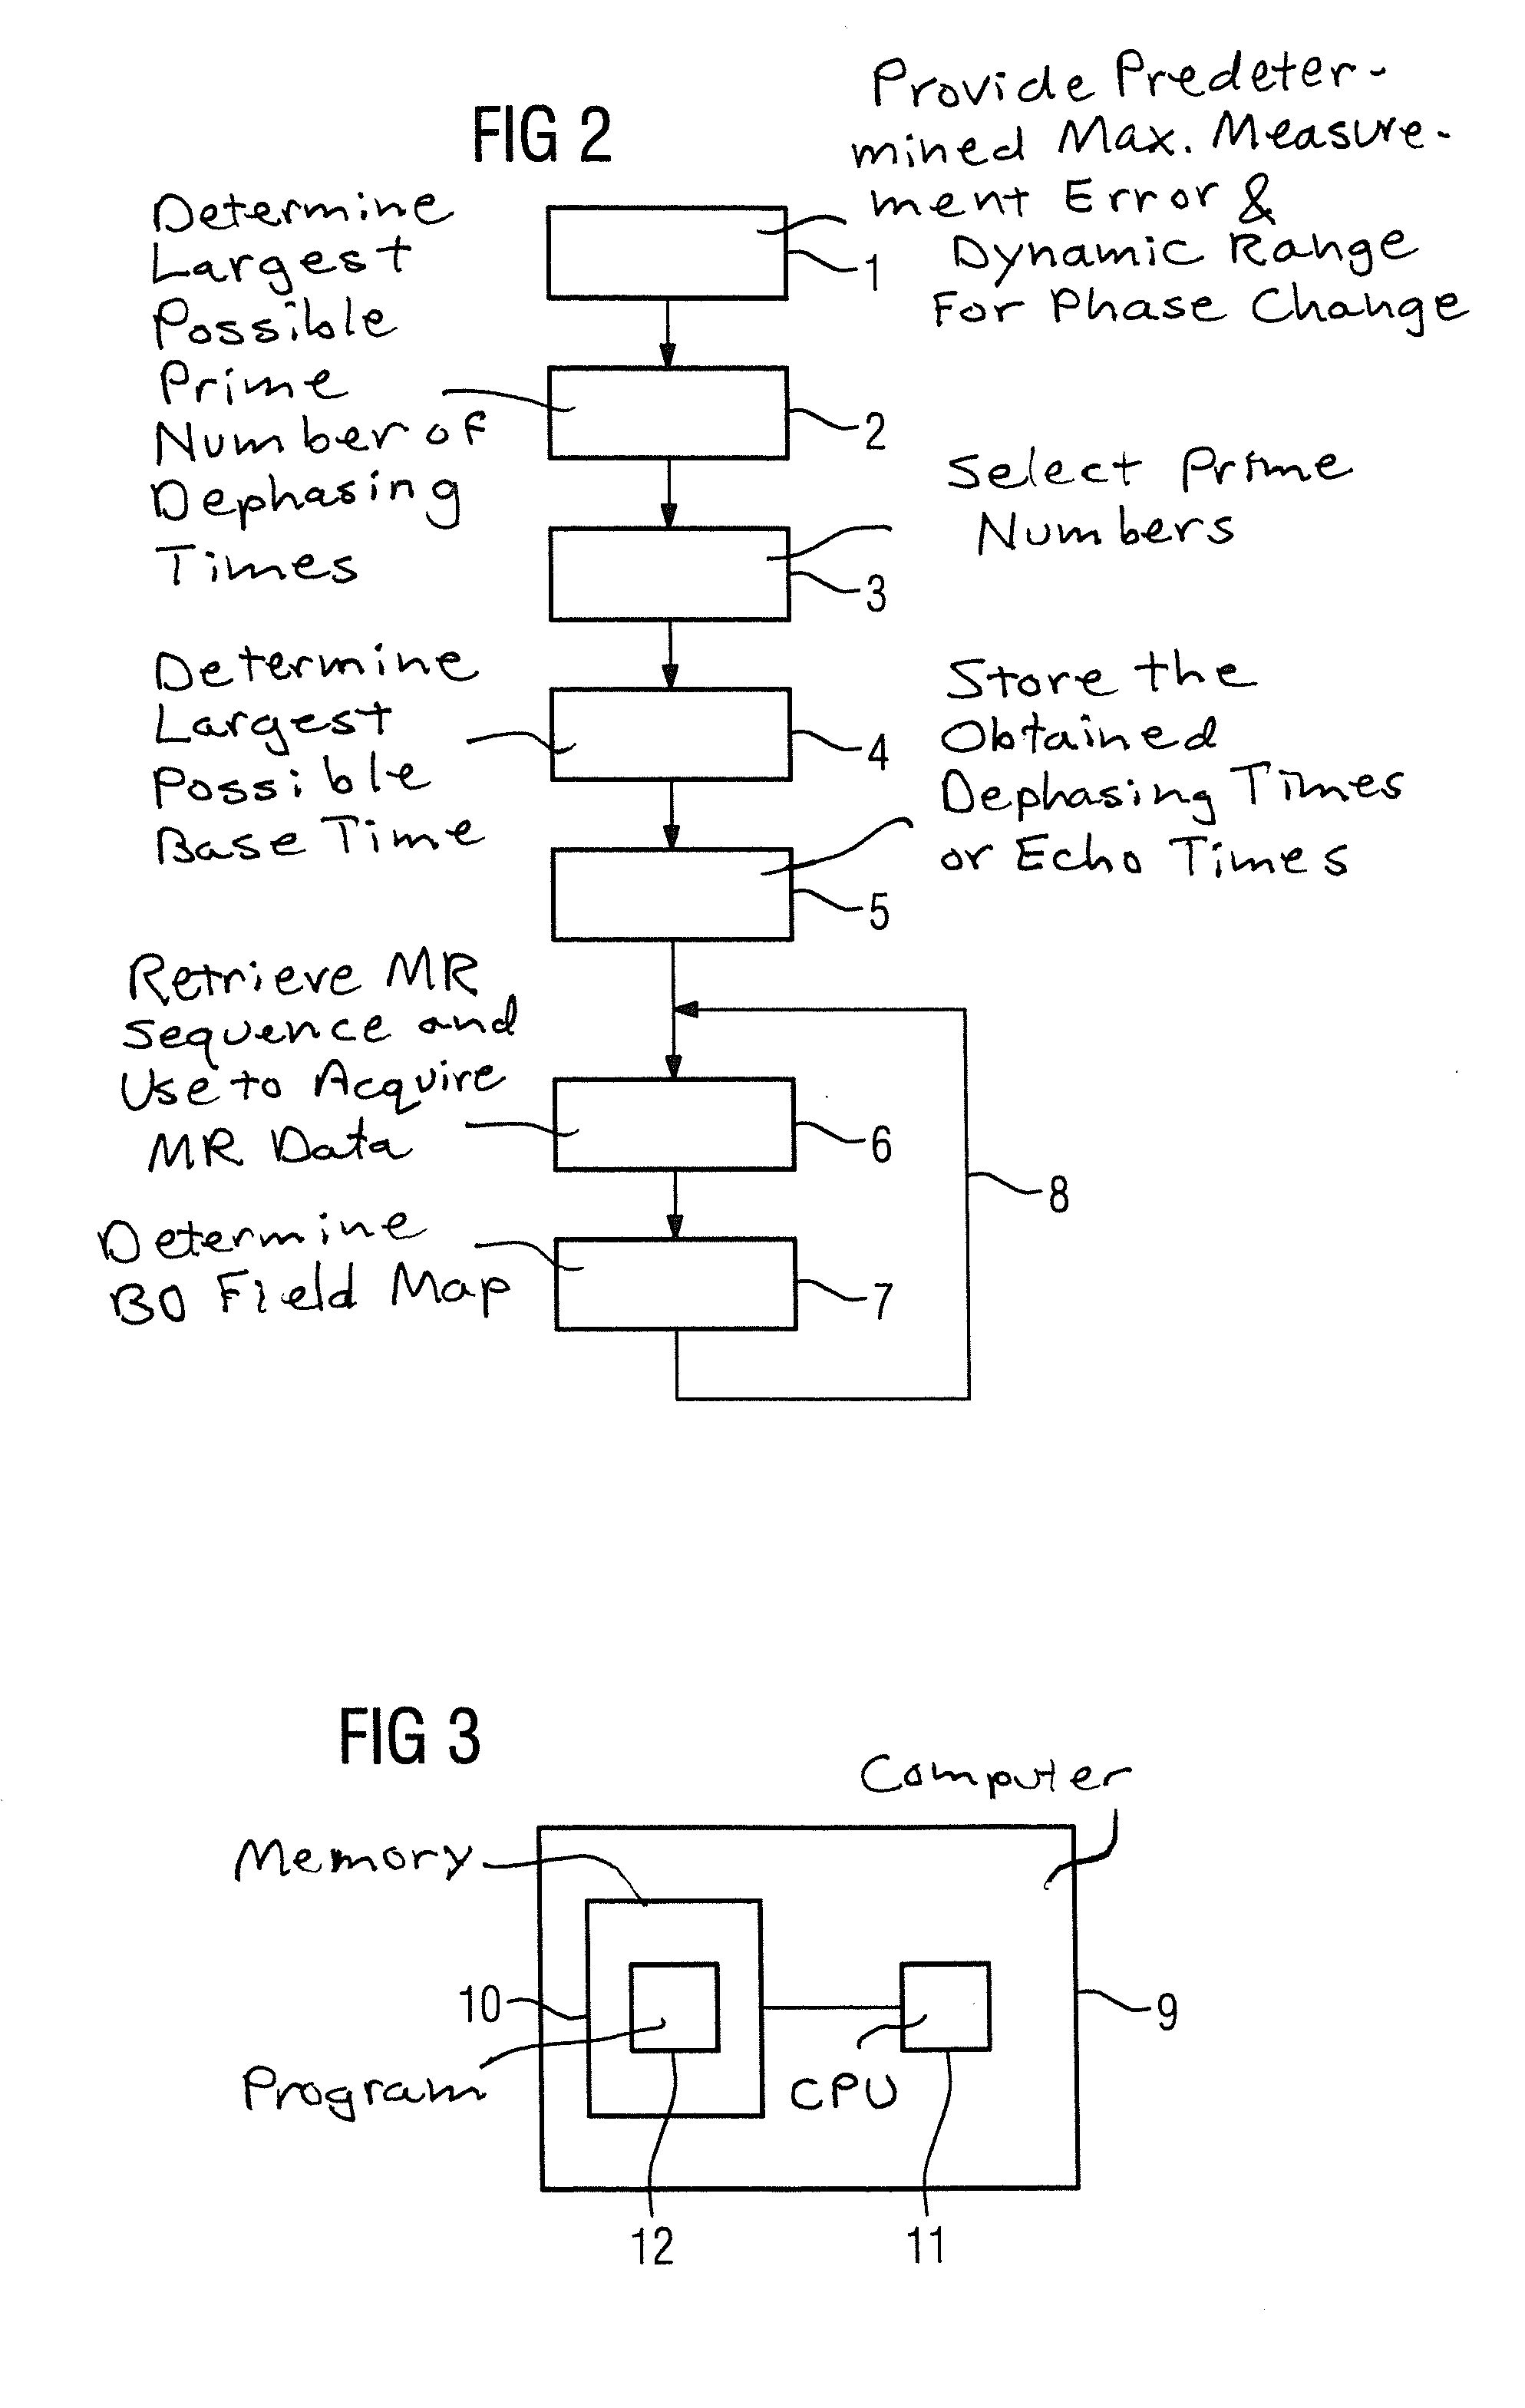 Method and computer to determine a b0 field map with a magnetic resonance apparatus